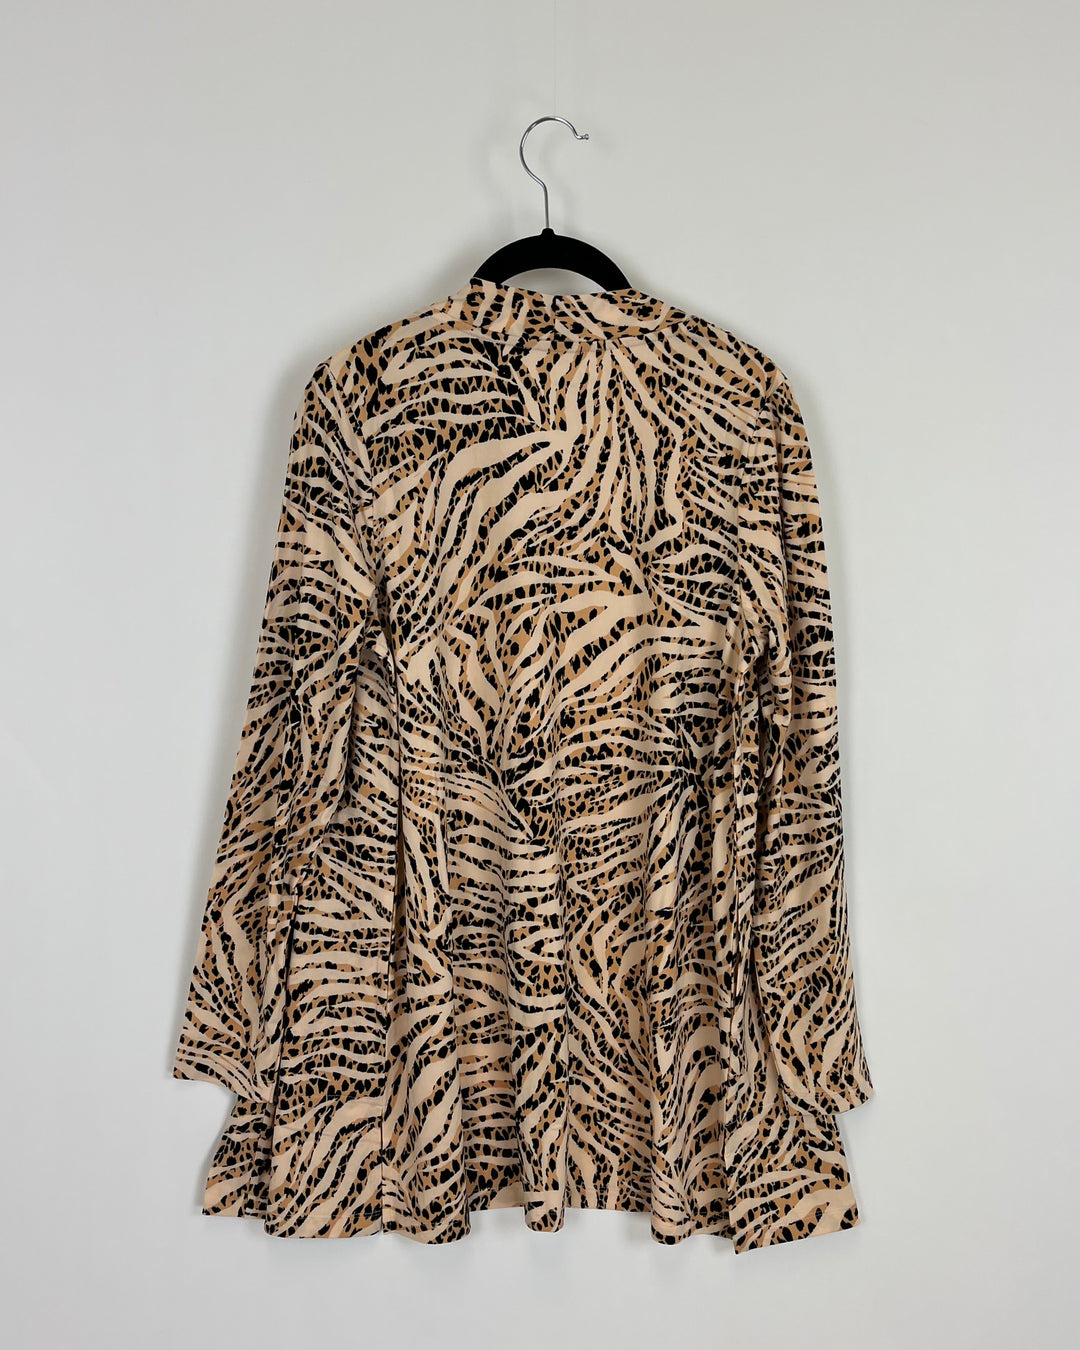 Leopard Print Cardigan - Size 4/6 And 6/8